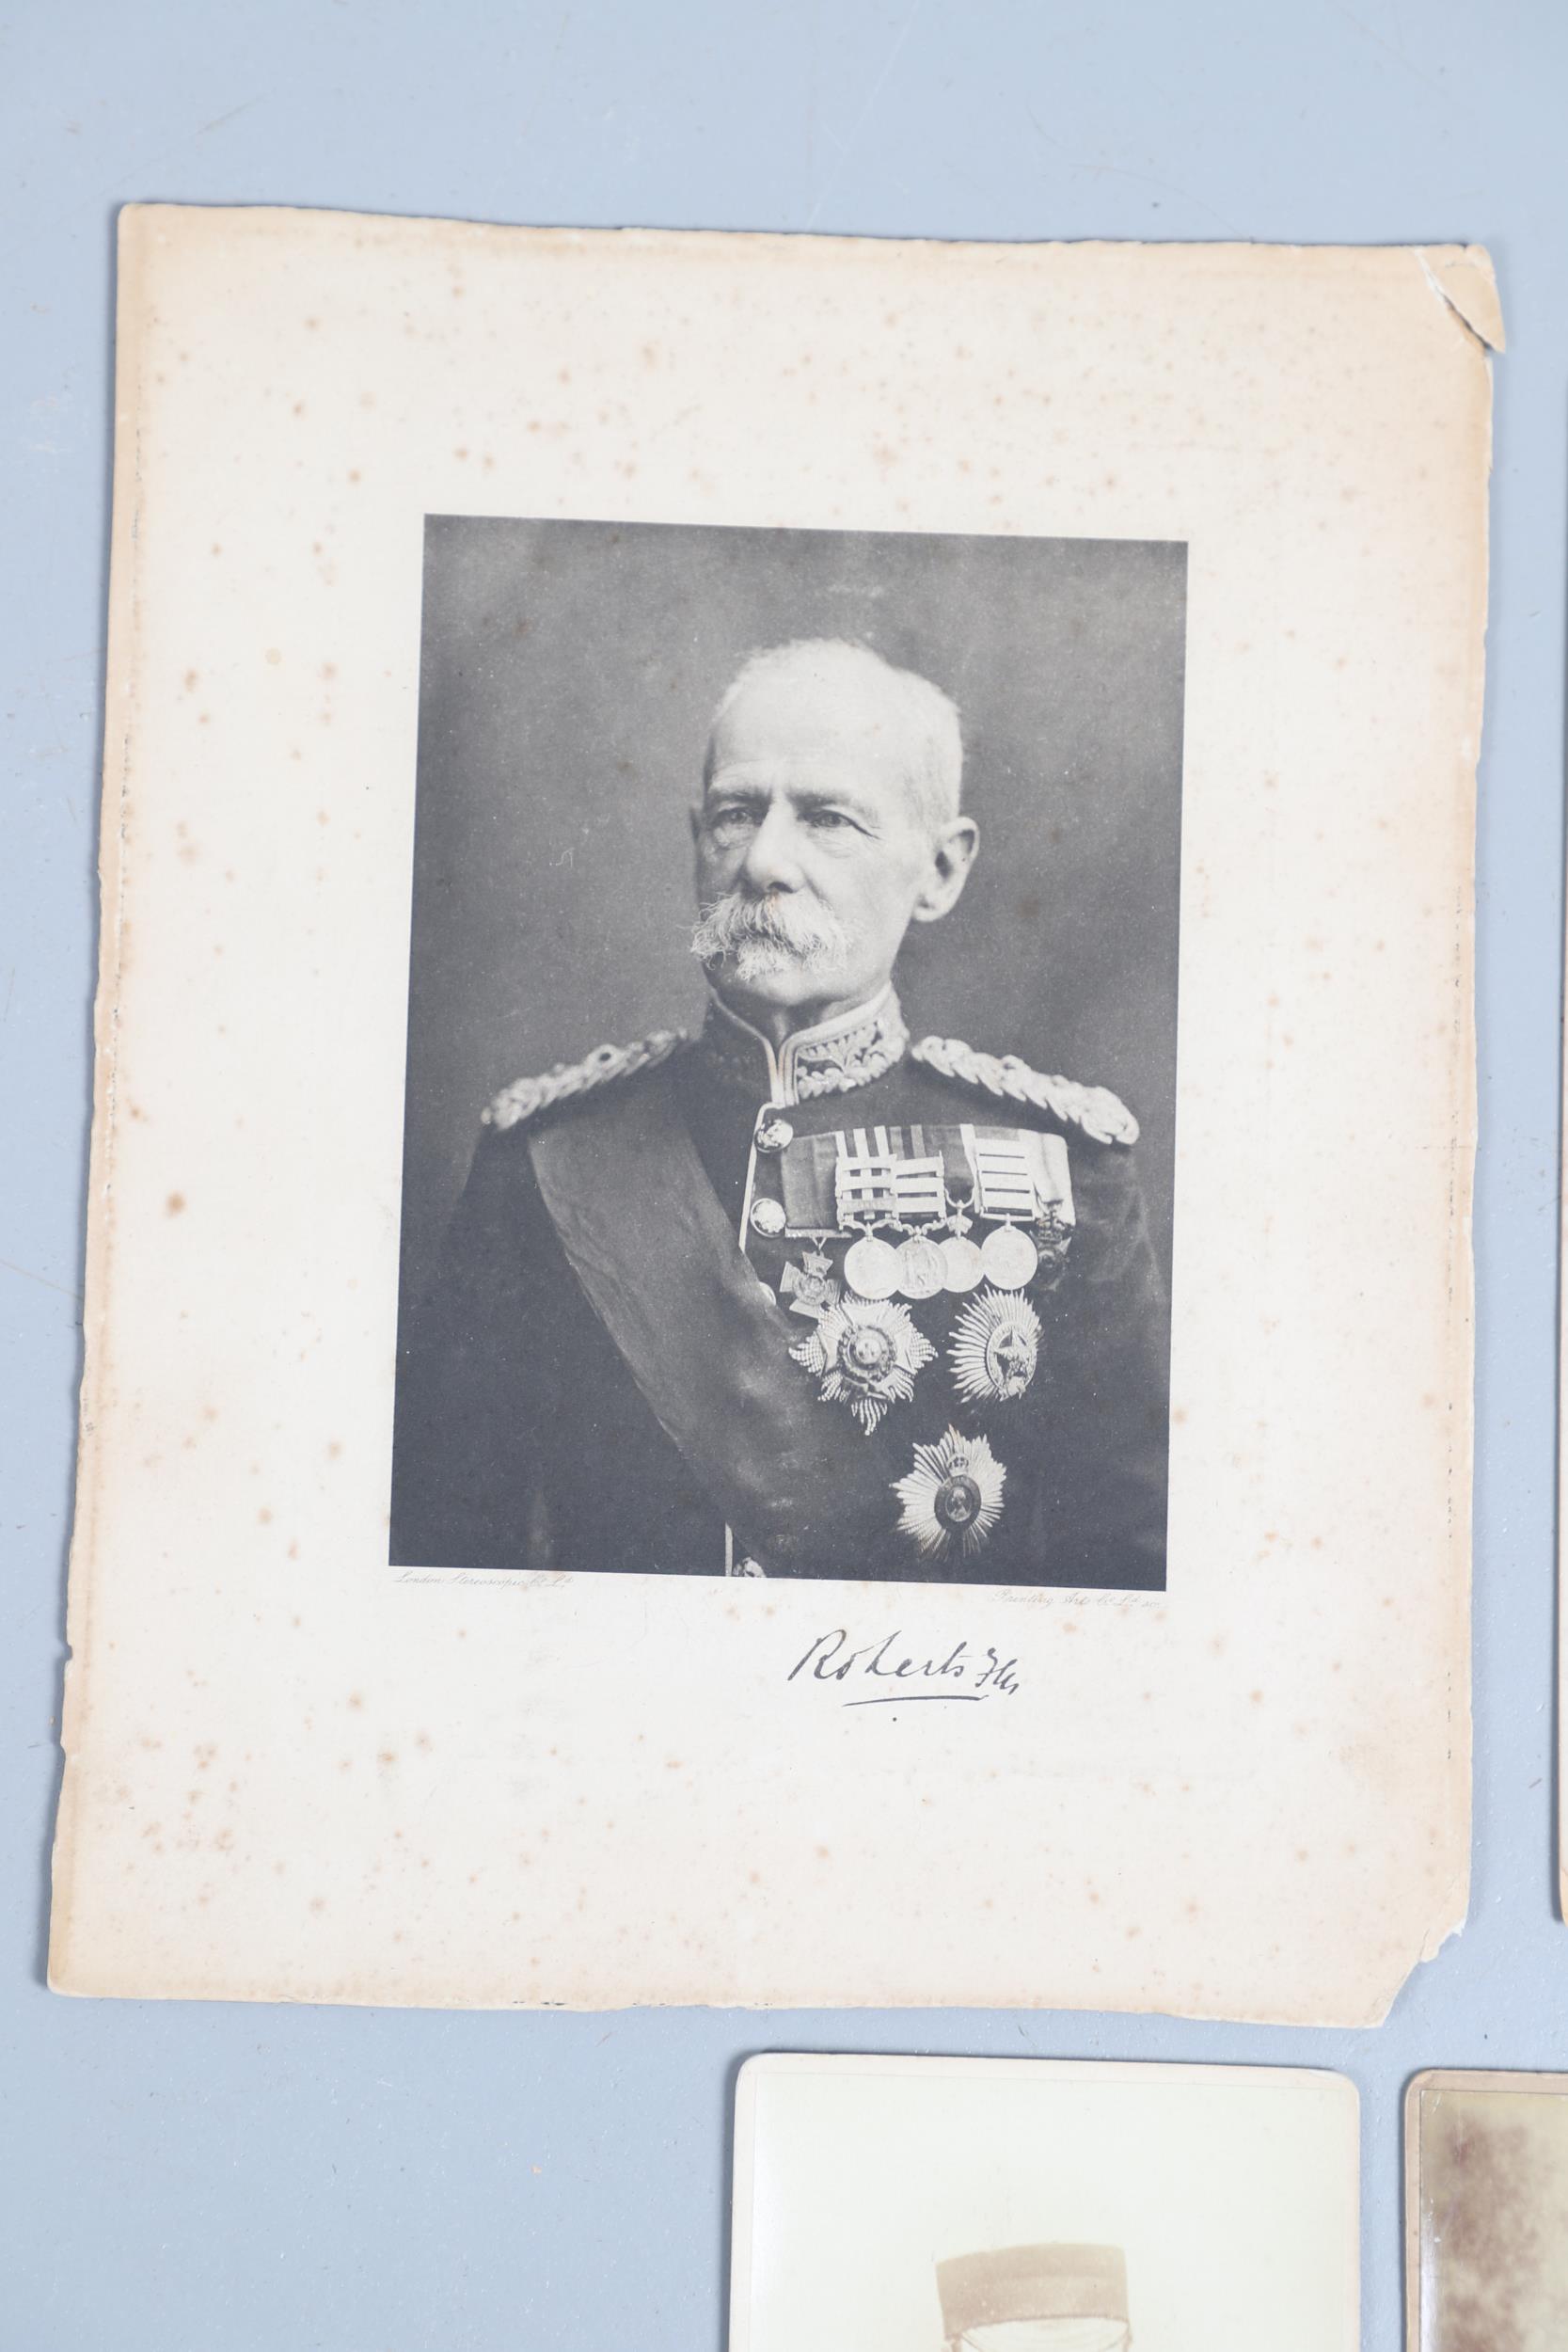 A PHOTOGRAPH OF LORD ROBERTS AND OTHER OFFICERS, AND SIMILAR IMAGES. - Image 2 of 7